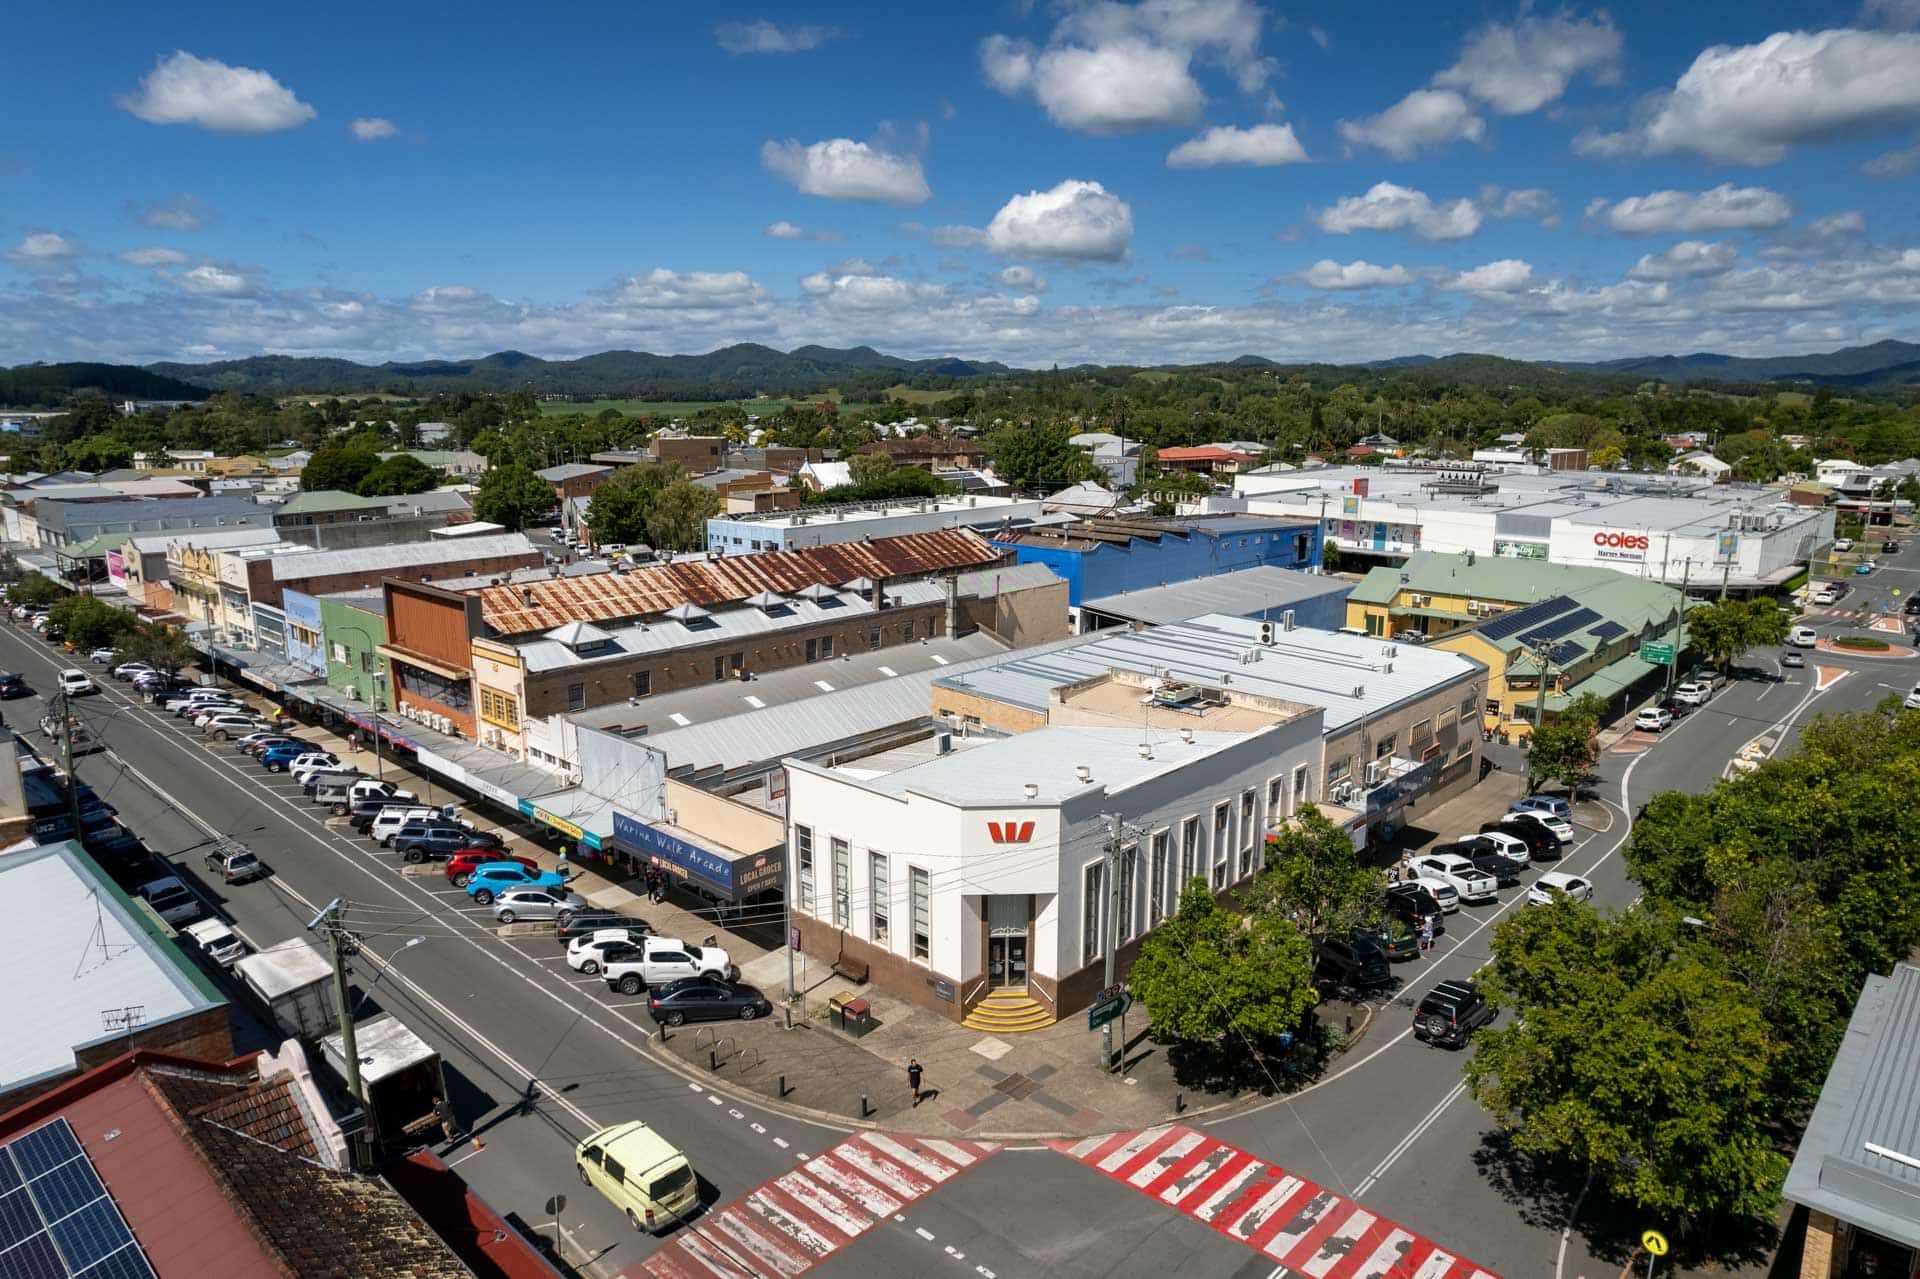 Byron Bay Commercial Real Estate Photographer 1 of 1 WESTPAC